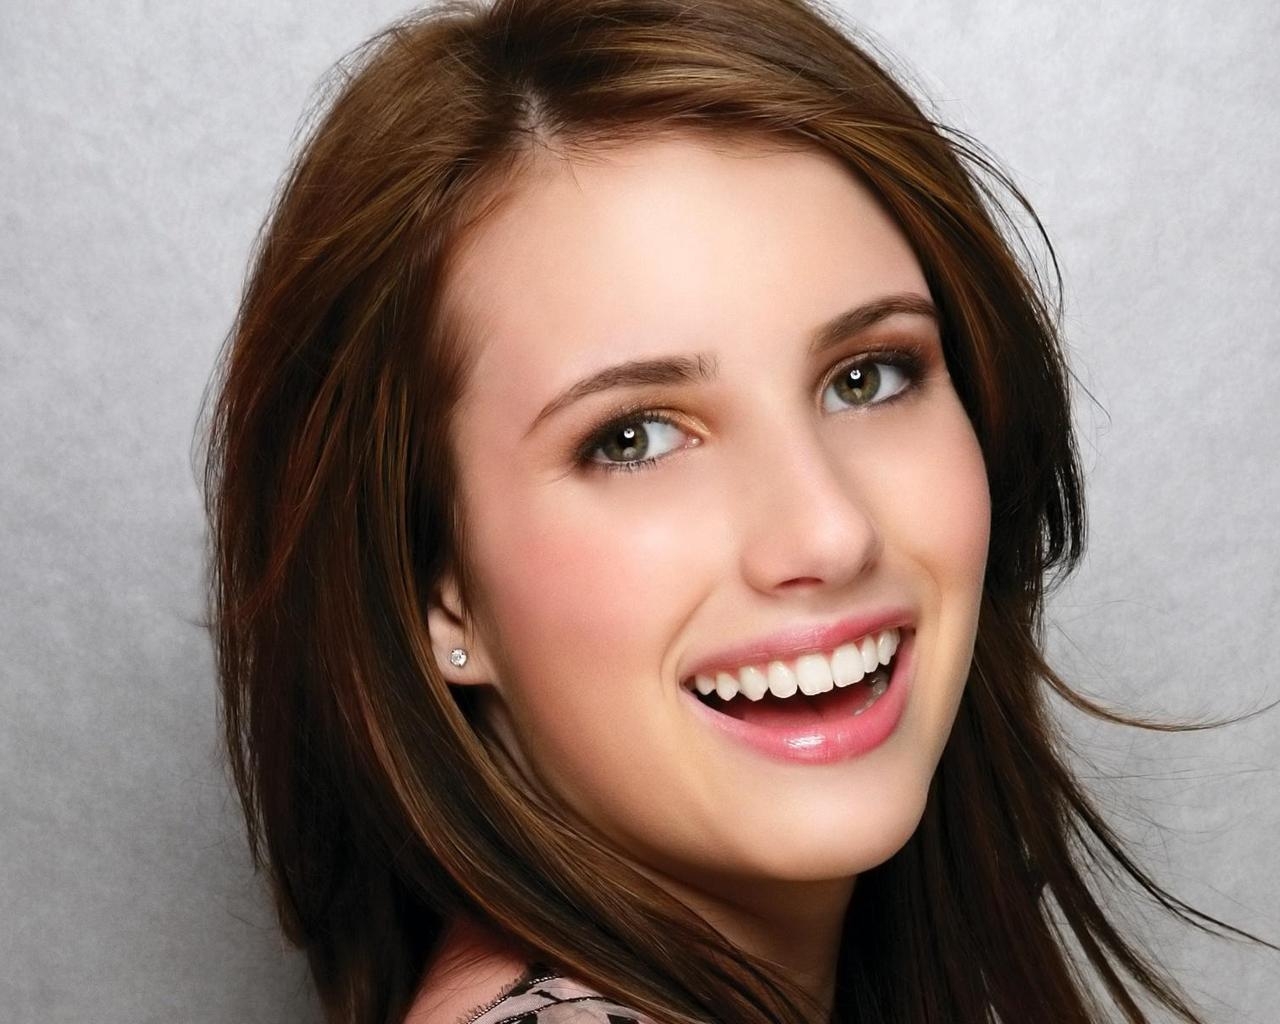 Emma Roberts Smile for 1280 x 1024 resolution